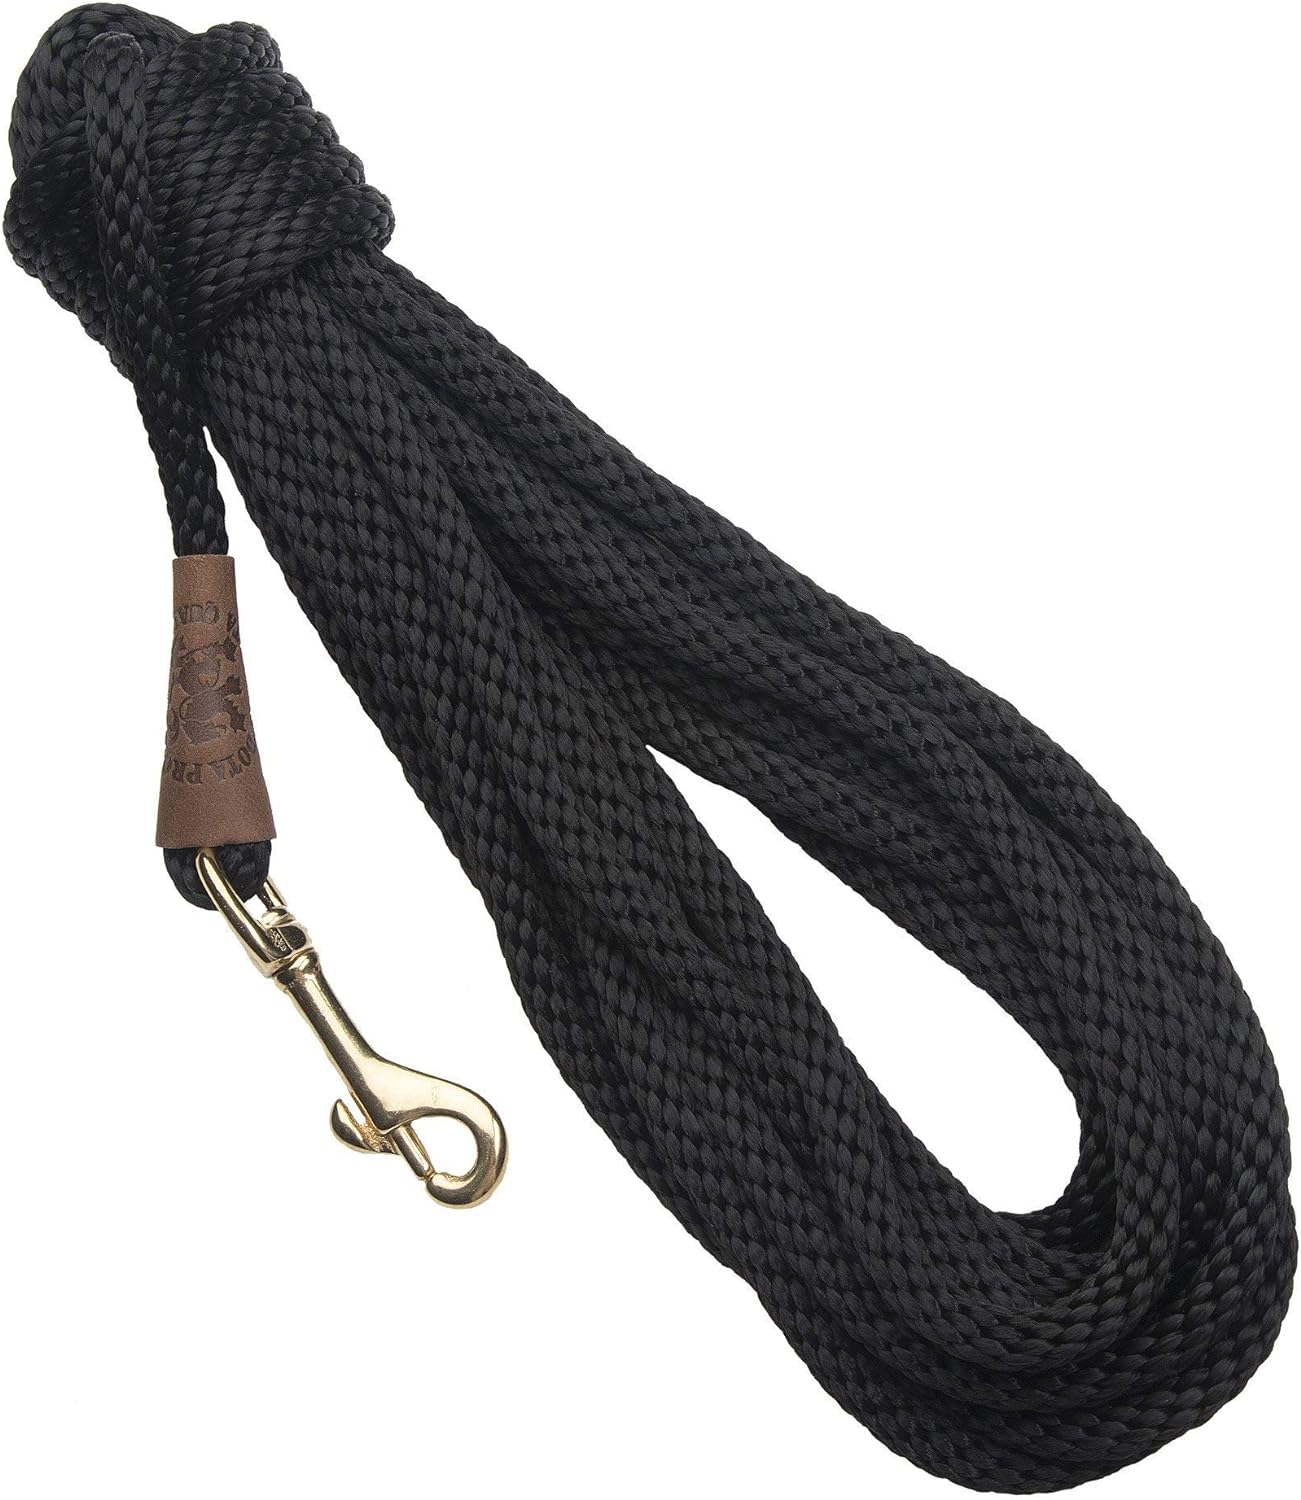 Read more about the article Mendota Obedience 20 Check Cord Dog Lead Review